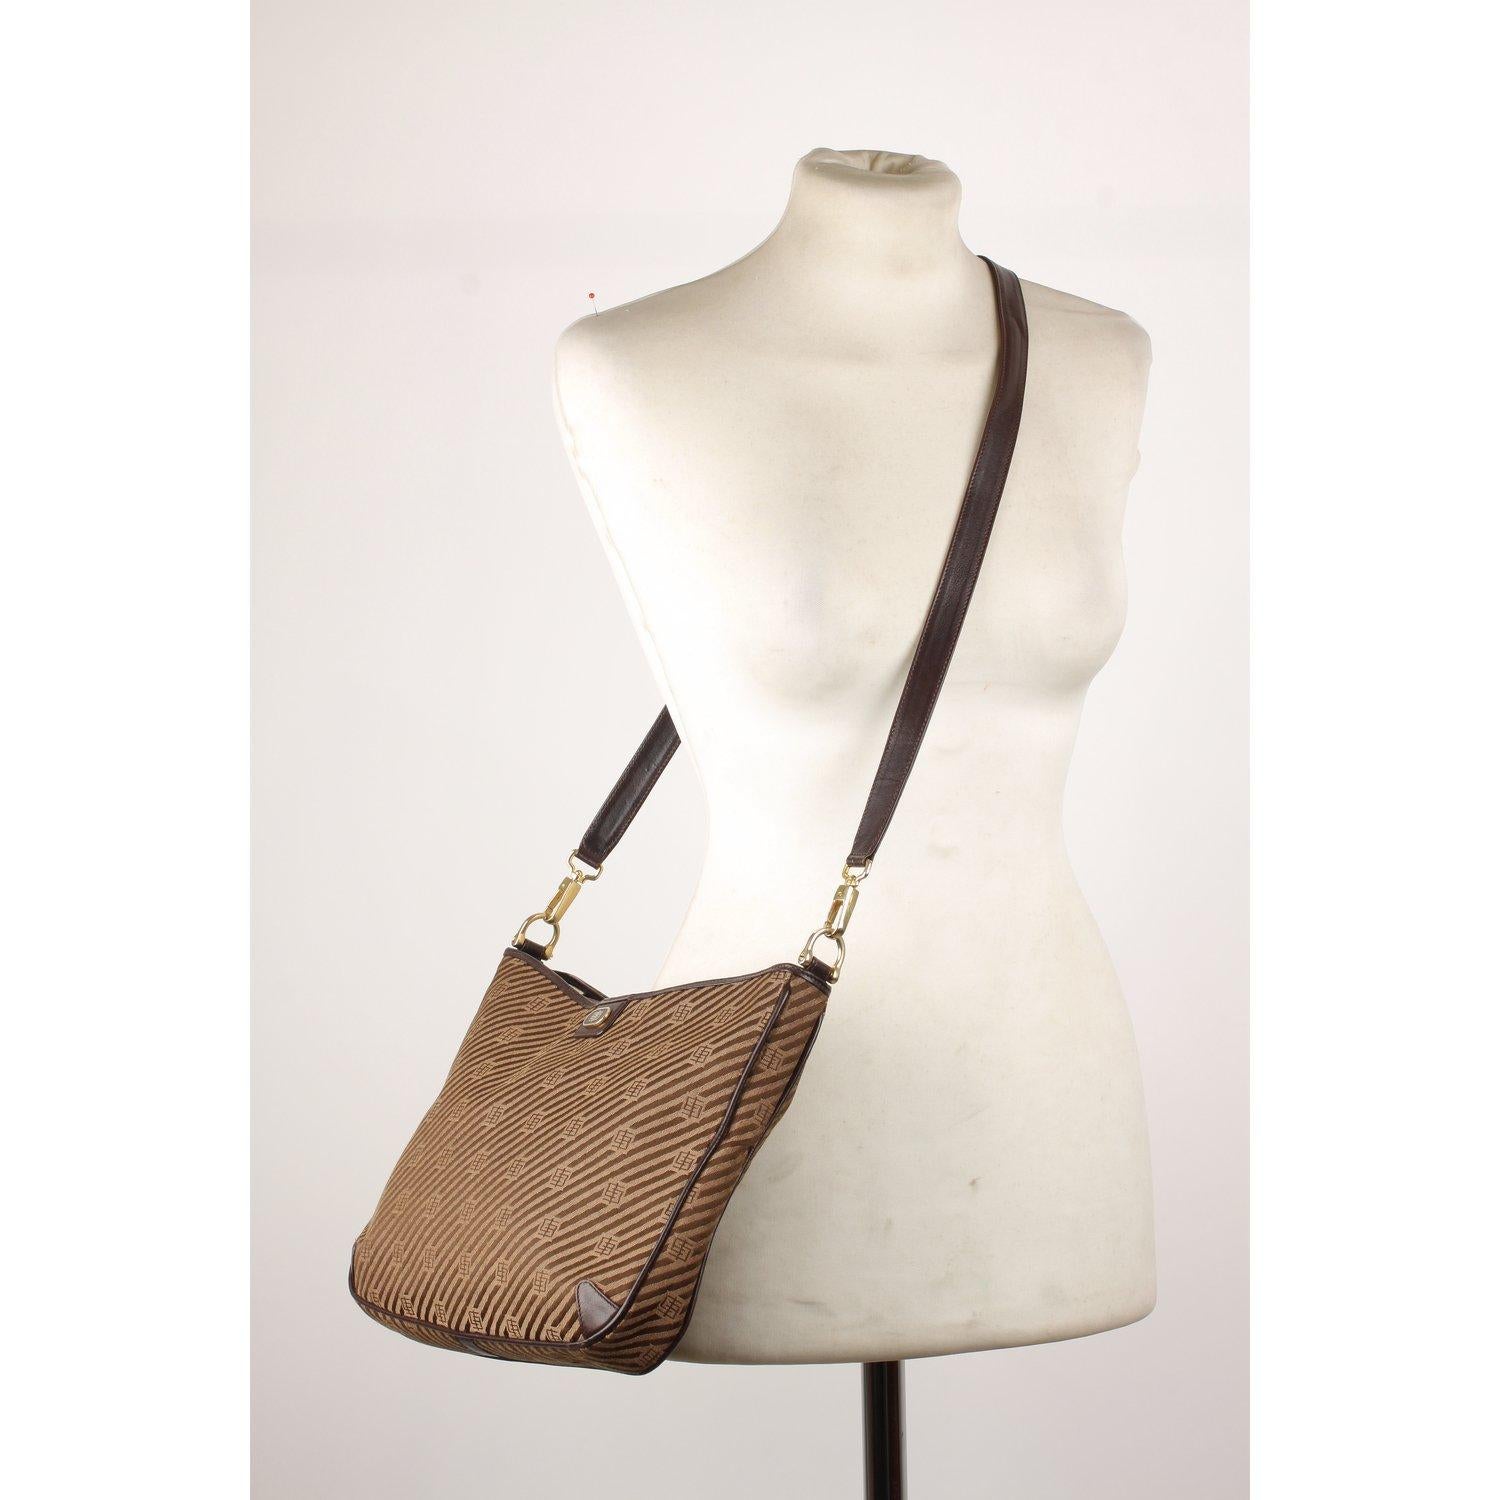 MATERIAL: Canvas, Leather COLOR: Brown MODEL: Crossbody Bag GENDER: Women SIZE: Medium Condition CONDITION DETAILS: B :GOOD CONDITION - Some light wear of use - some wear of use on leather trim Measurements MEASUREMENTS: BAG HEIGHT: 9 inches - 22,8